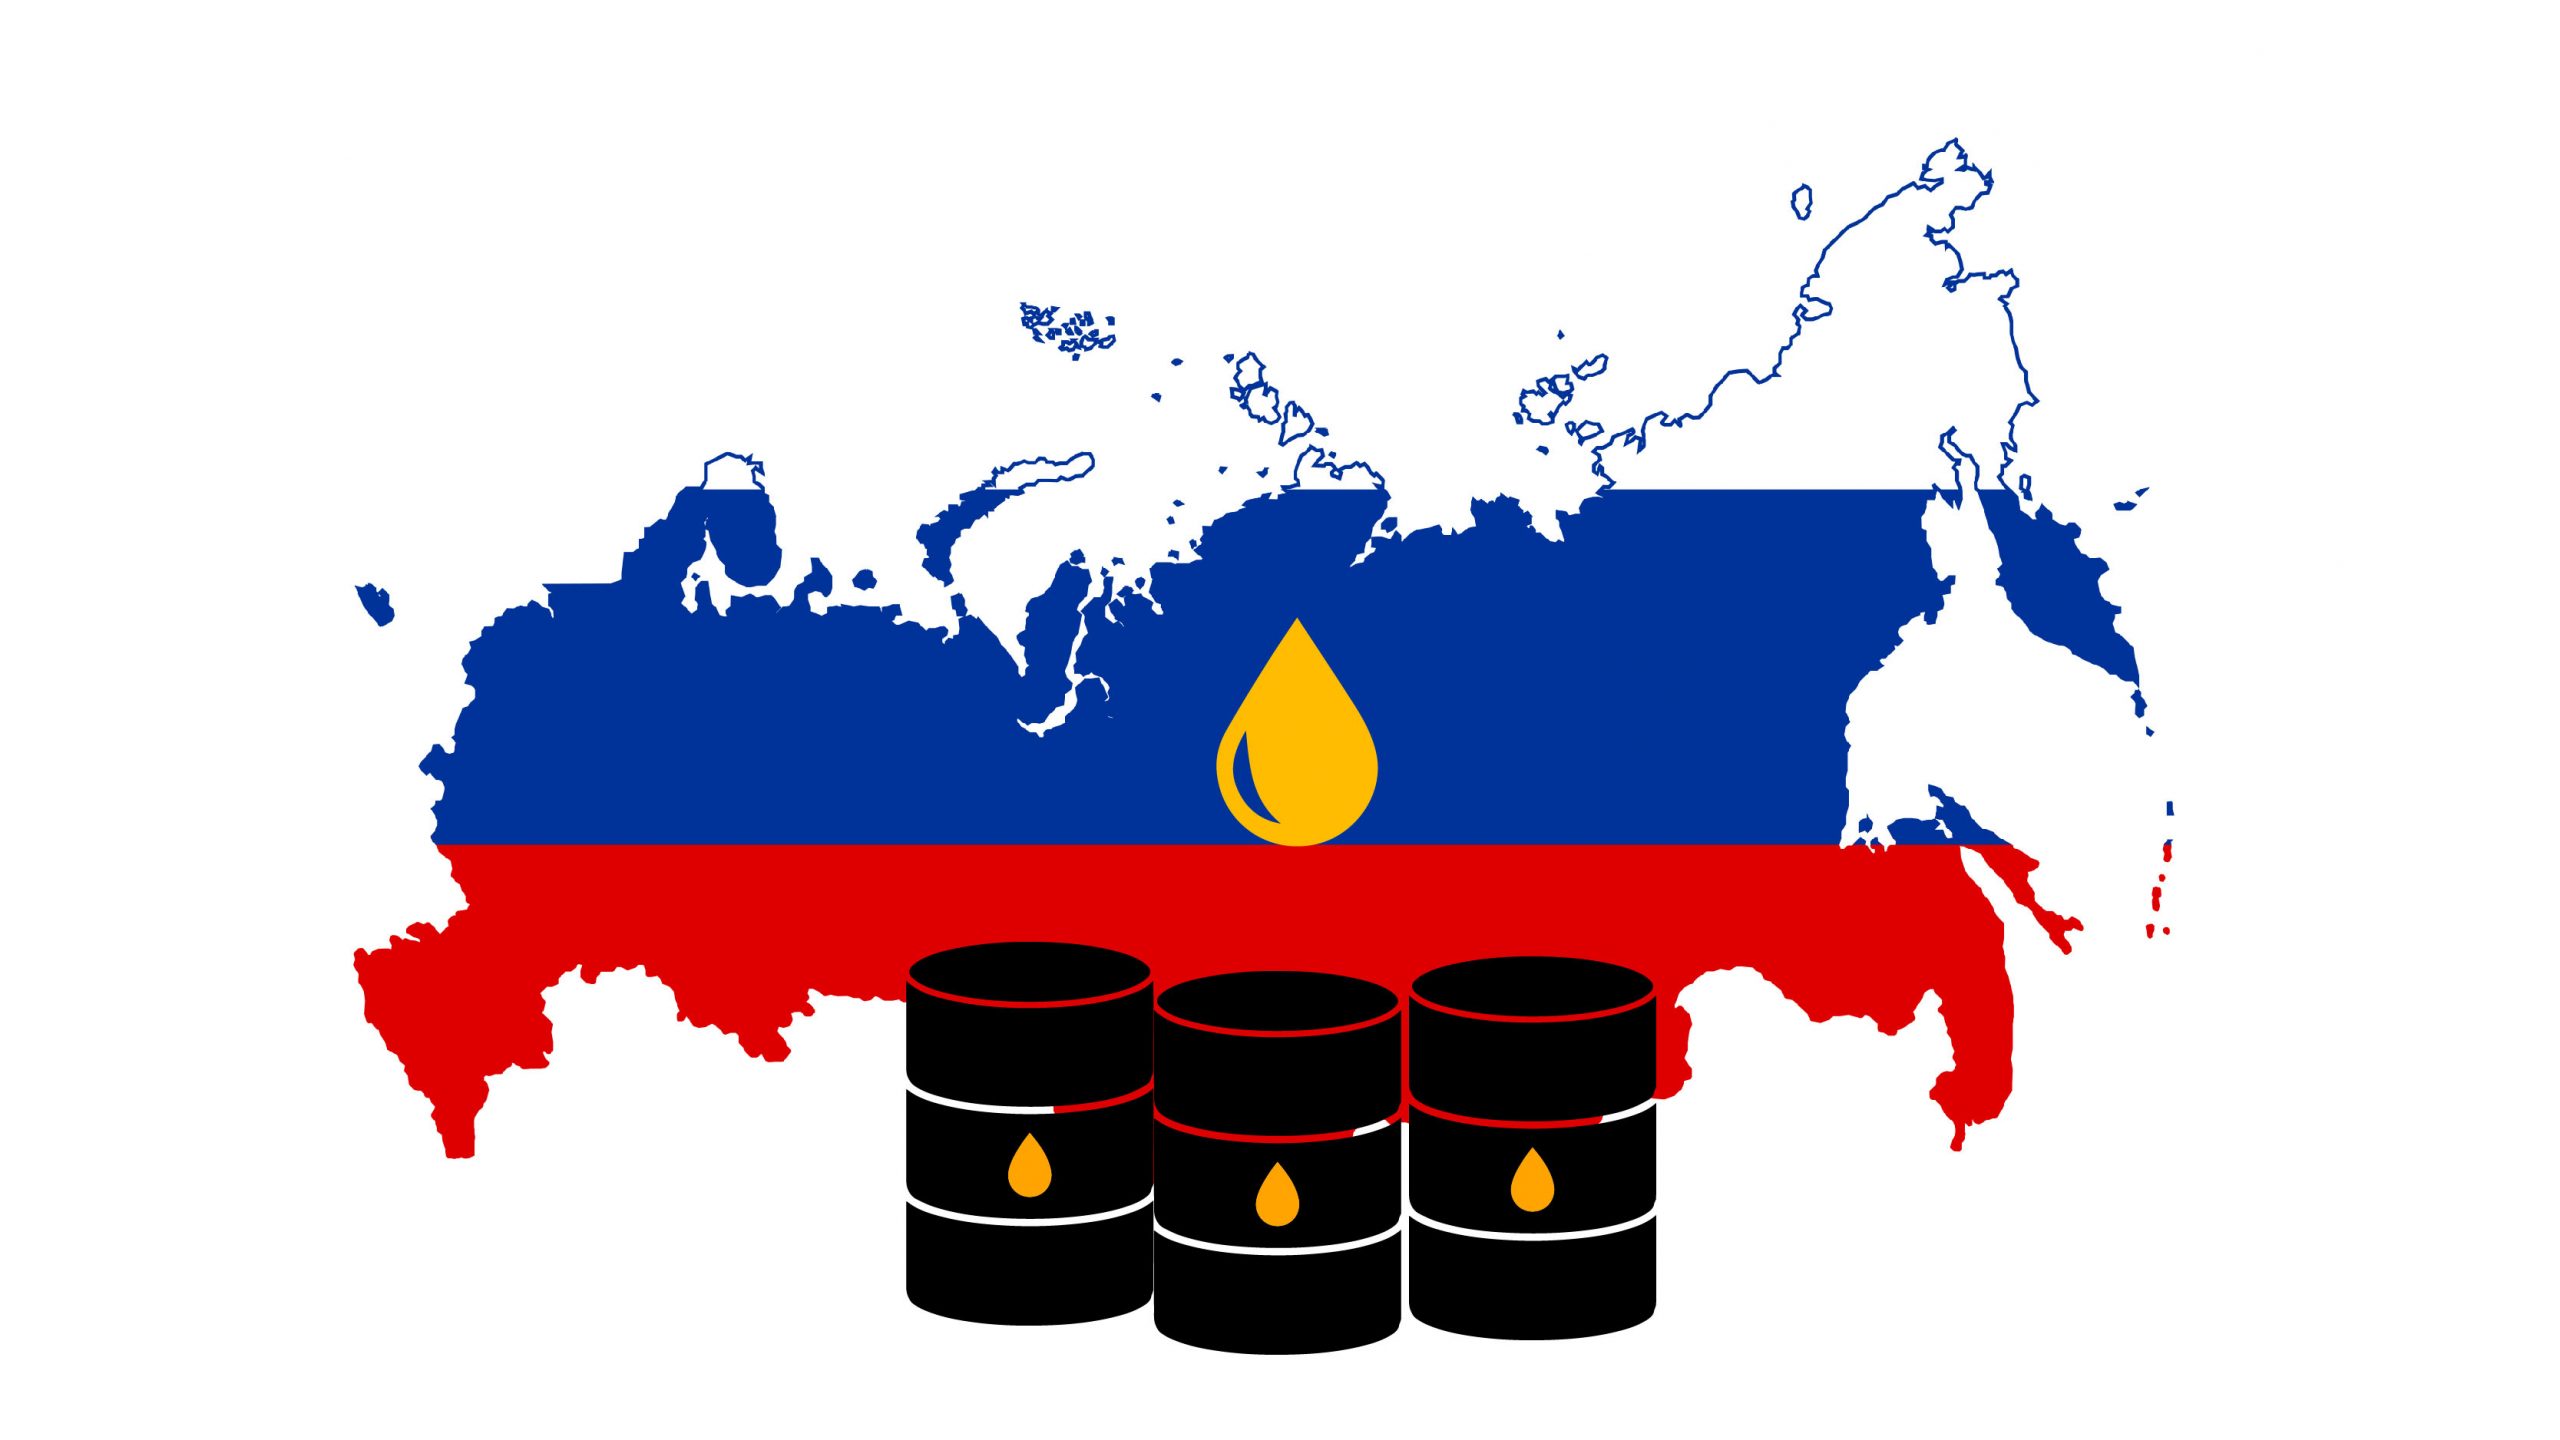 India Is Likely Exporting Refined Russian Oil to the West